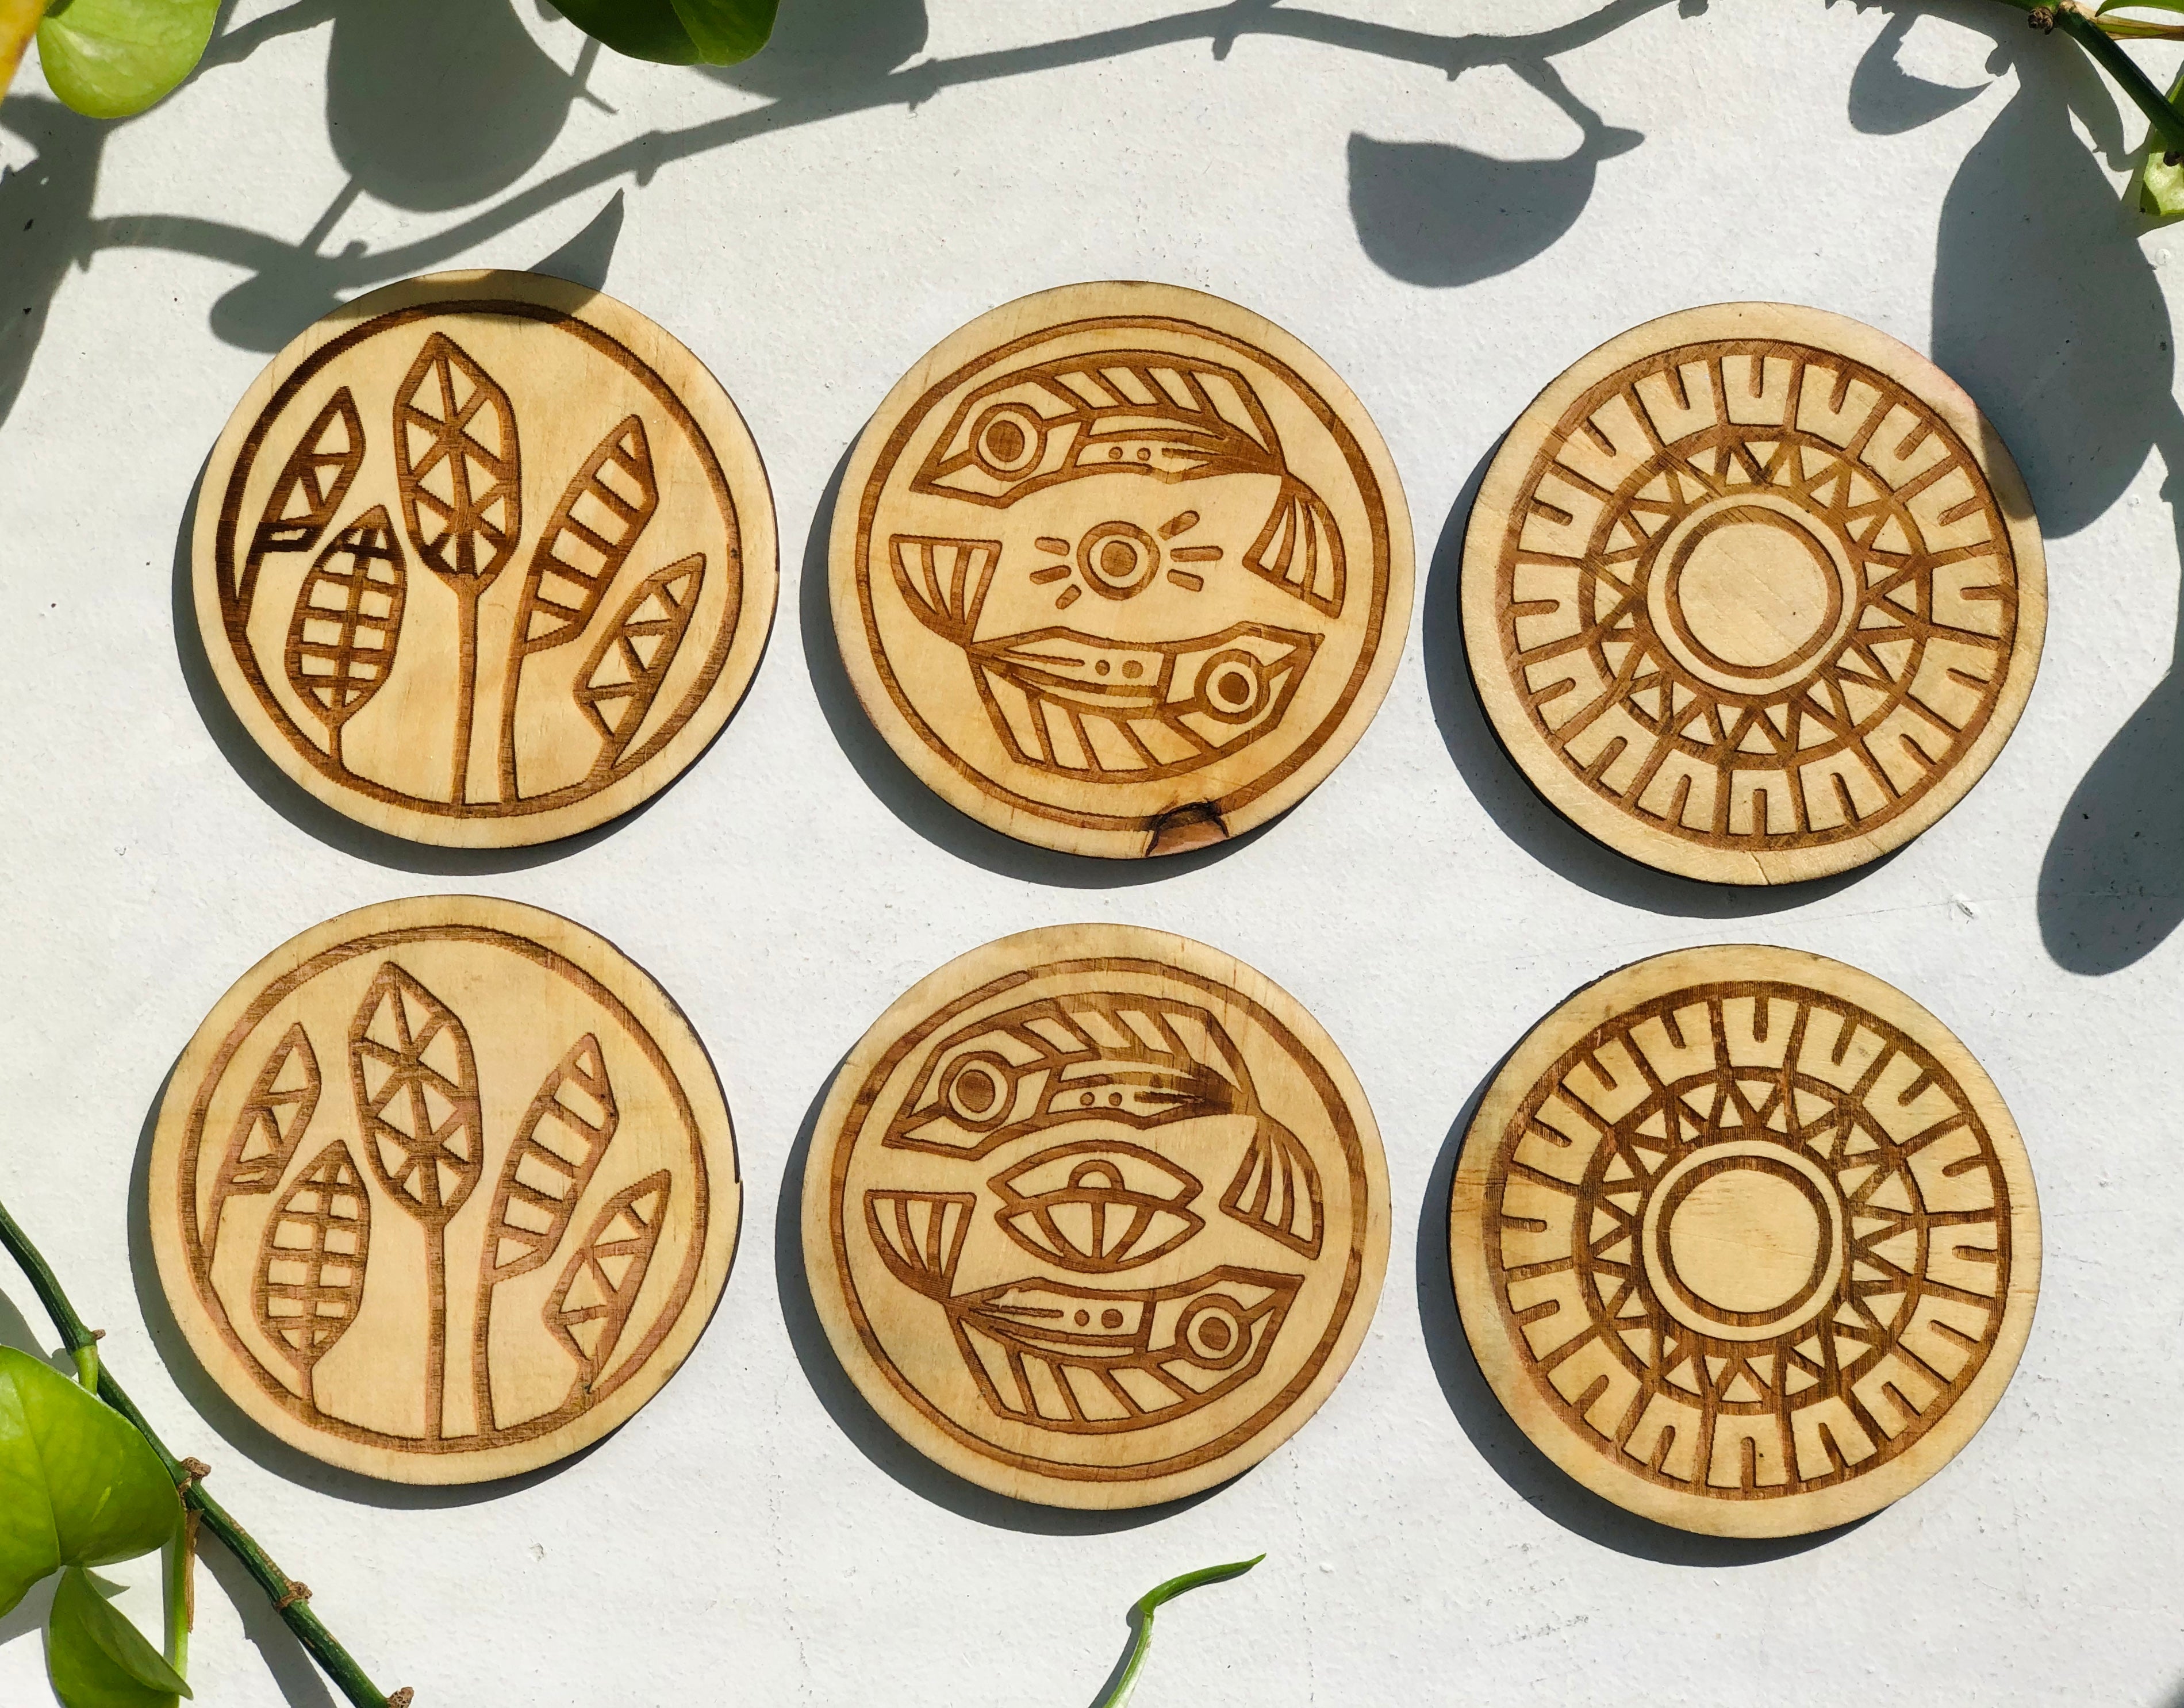 Display of 6pc carved wooden coaster set.